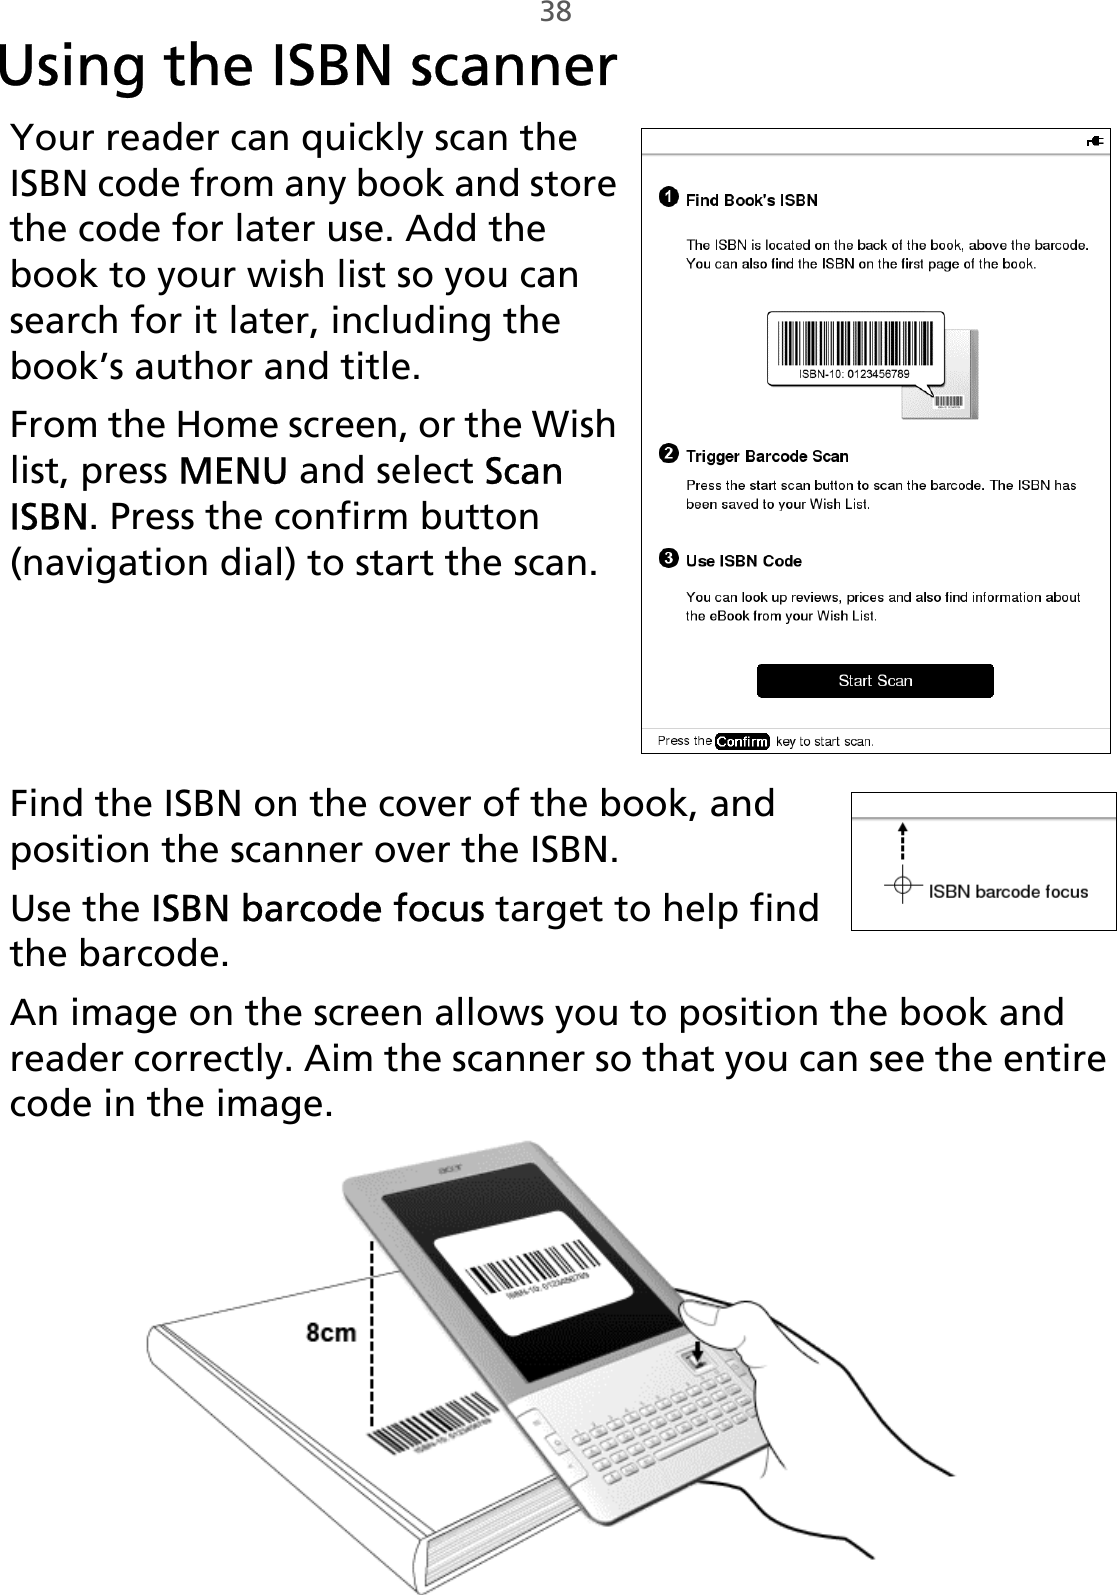 38Using the ISBN scannerYour reader can quickly scan the ISBN code from any book and store the code for later use. Add the book to your wish list so you can search for it later, including the book’s author and title.From the Home screen, or the Wish list, press MENU and select Scan ISBN. Press the confirm button (navigation dial) to start the scan.    Find the ISBN on the cover of the book, and position the scanner over the ISBN. Use the ISBN barcode focus target to help find the barcode.An image on the screen allows you to position the book and reader correctly. Aim the scanner so that you can see the entire code in the image.